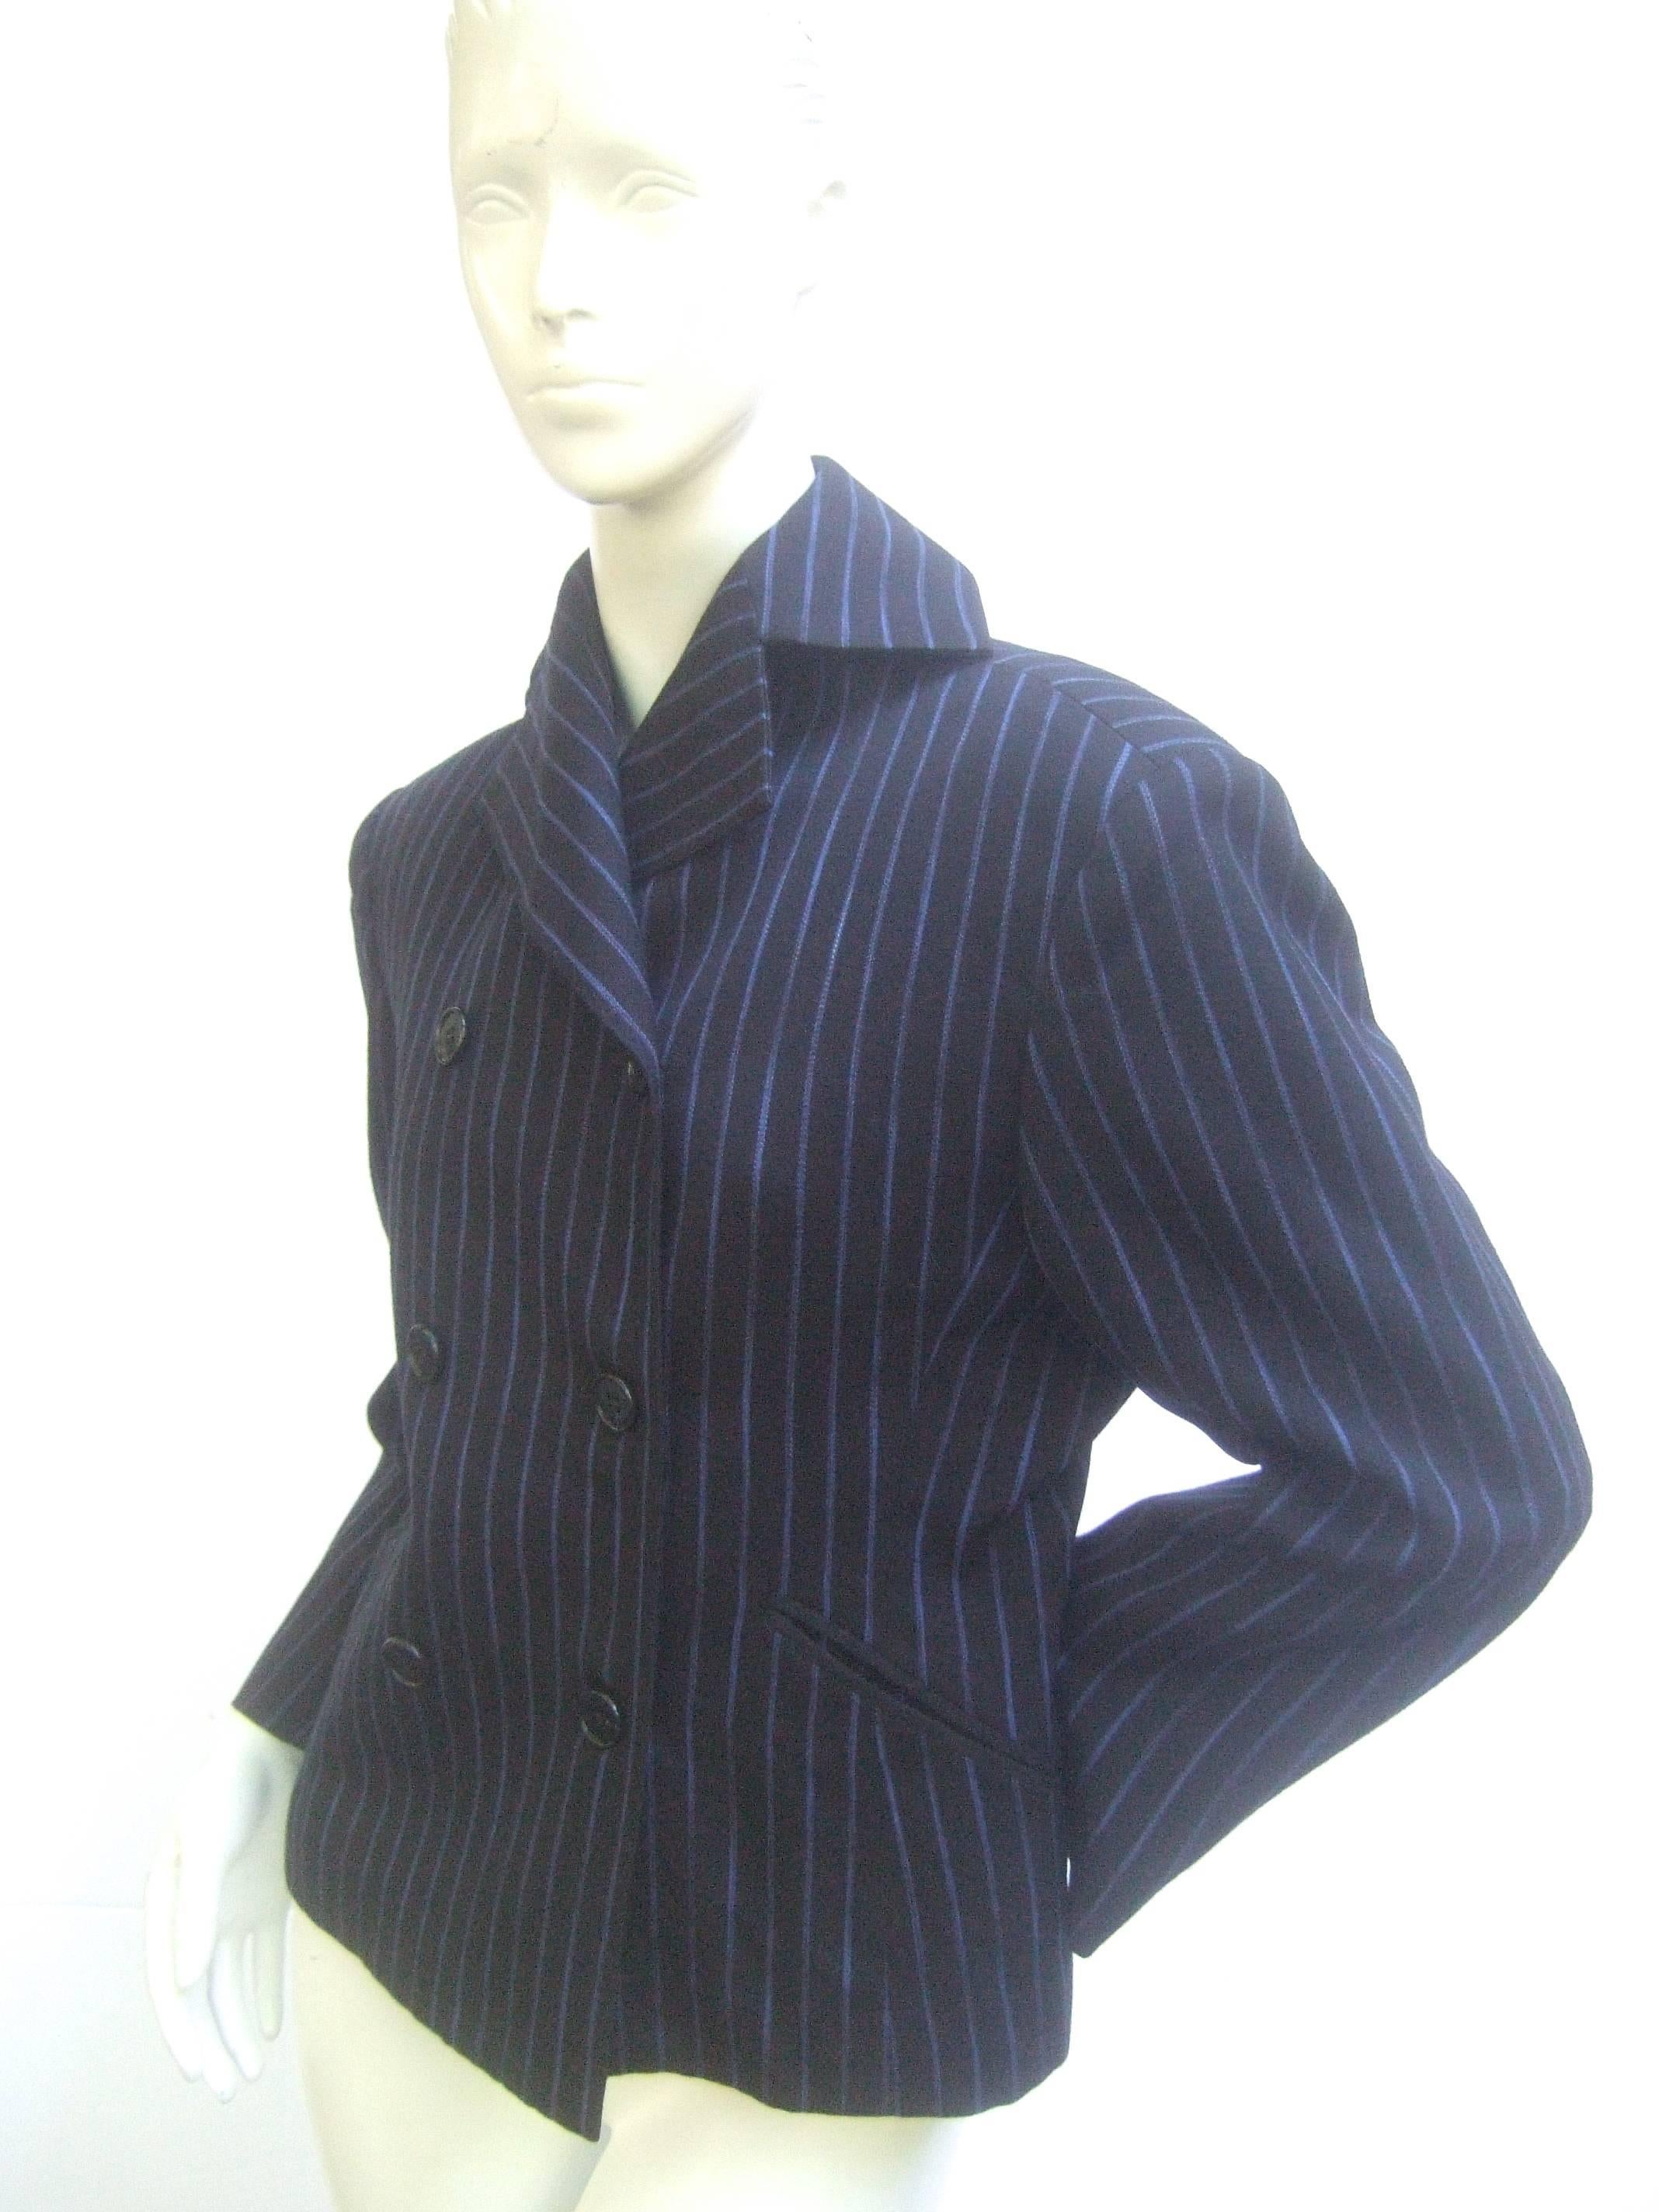 Issey Miyake Women's pin striped double breasted wool jacket Size Small 
The classic wool jacket is designed with medium weight black Laine
wool juxtaposed with lapis blue wide pin stripes  

Designed with six black lucite buttons that run down the